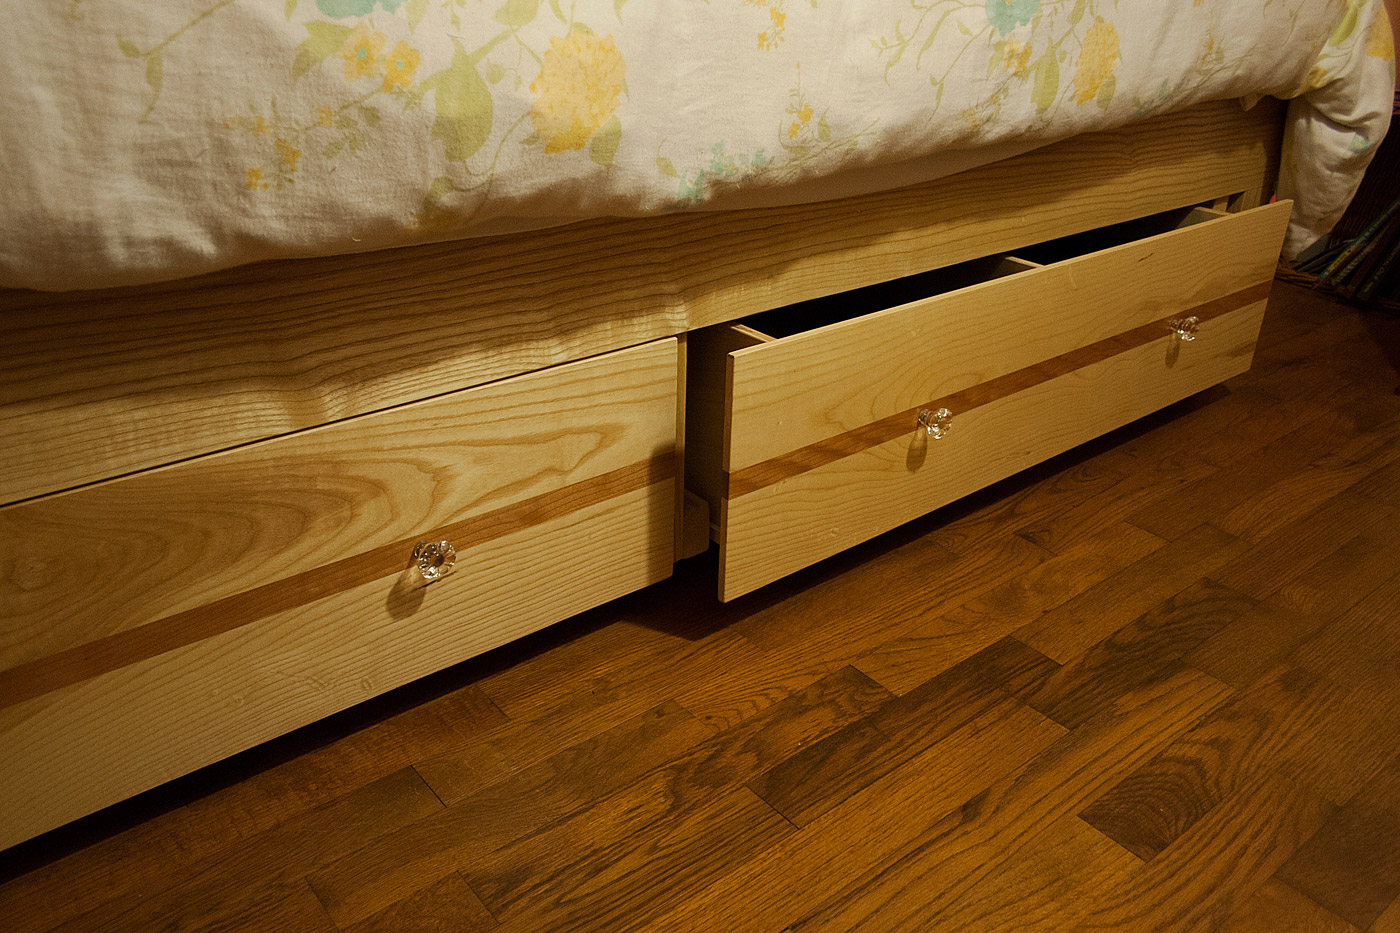 Ash w/ deep drawers with dividers, curly cherry stripe, and shelf